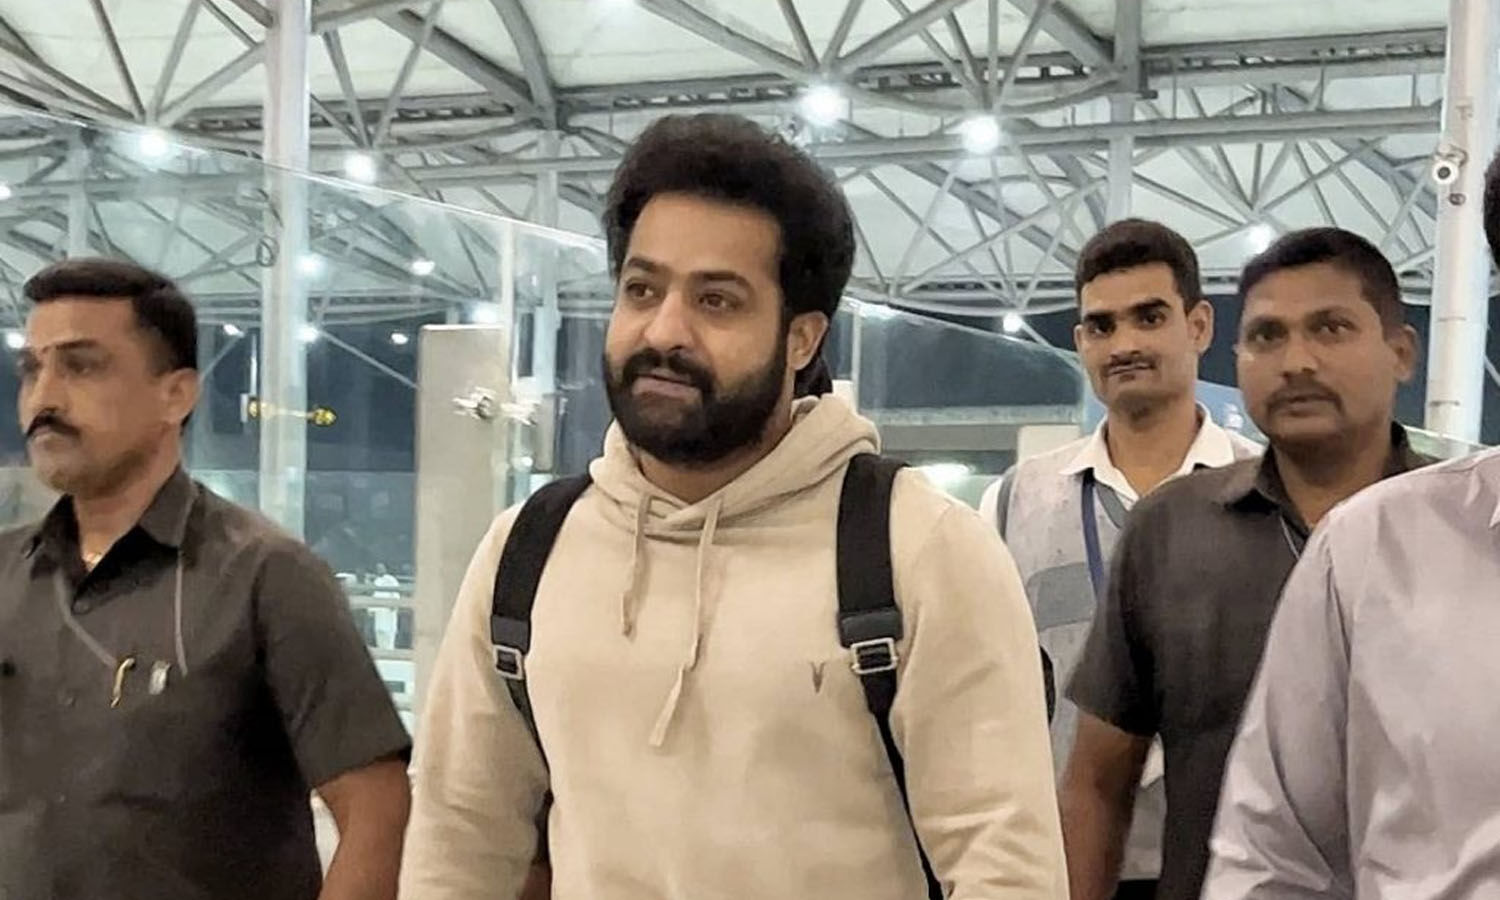 Japan Earthquake: South superstar Jr NTR returned safely from Japan, had gone there for holiday with family